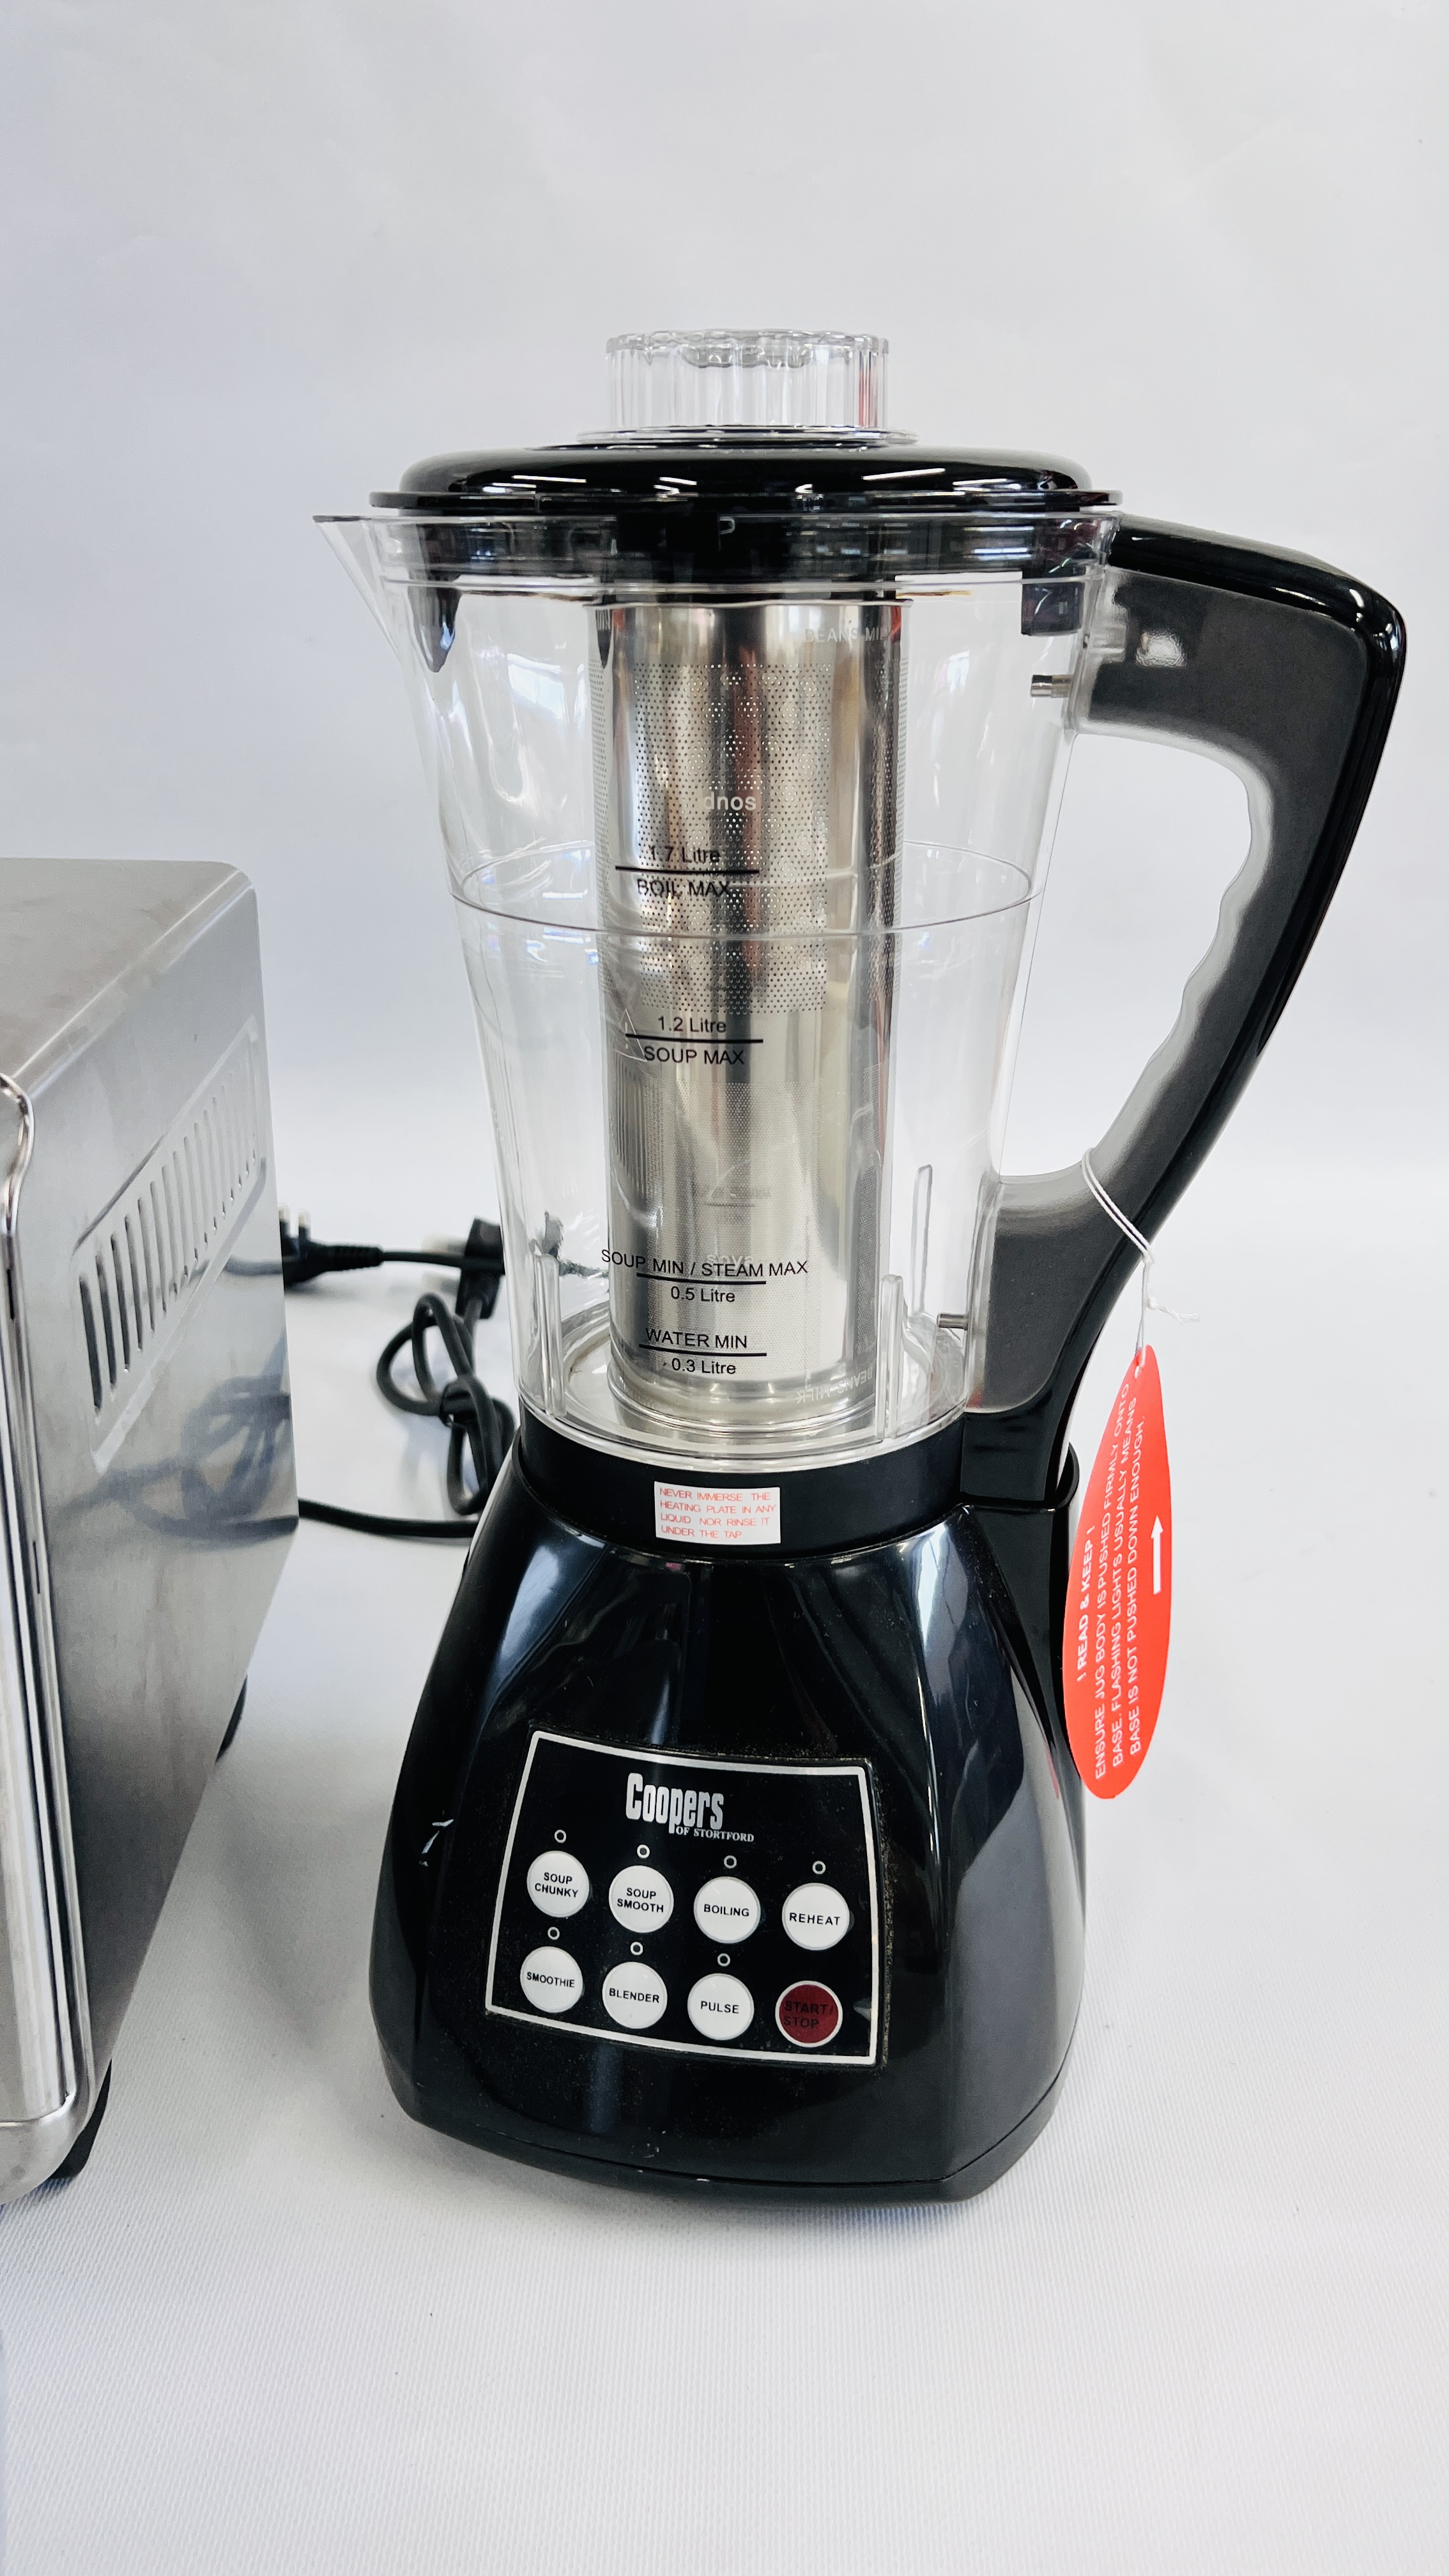 RUSSELL HOBBS STAINLESS STEEL TABLE TOP OVEN, COOPERS COMBI BLENDER, - Image 2 of 9